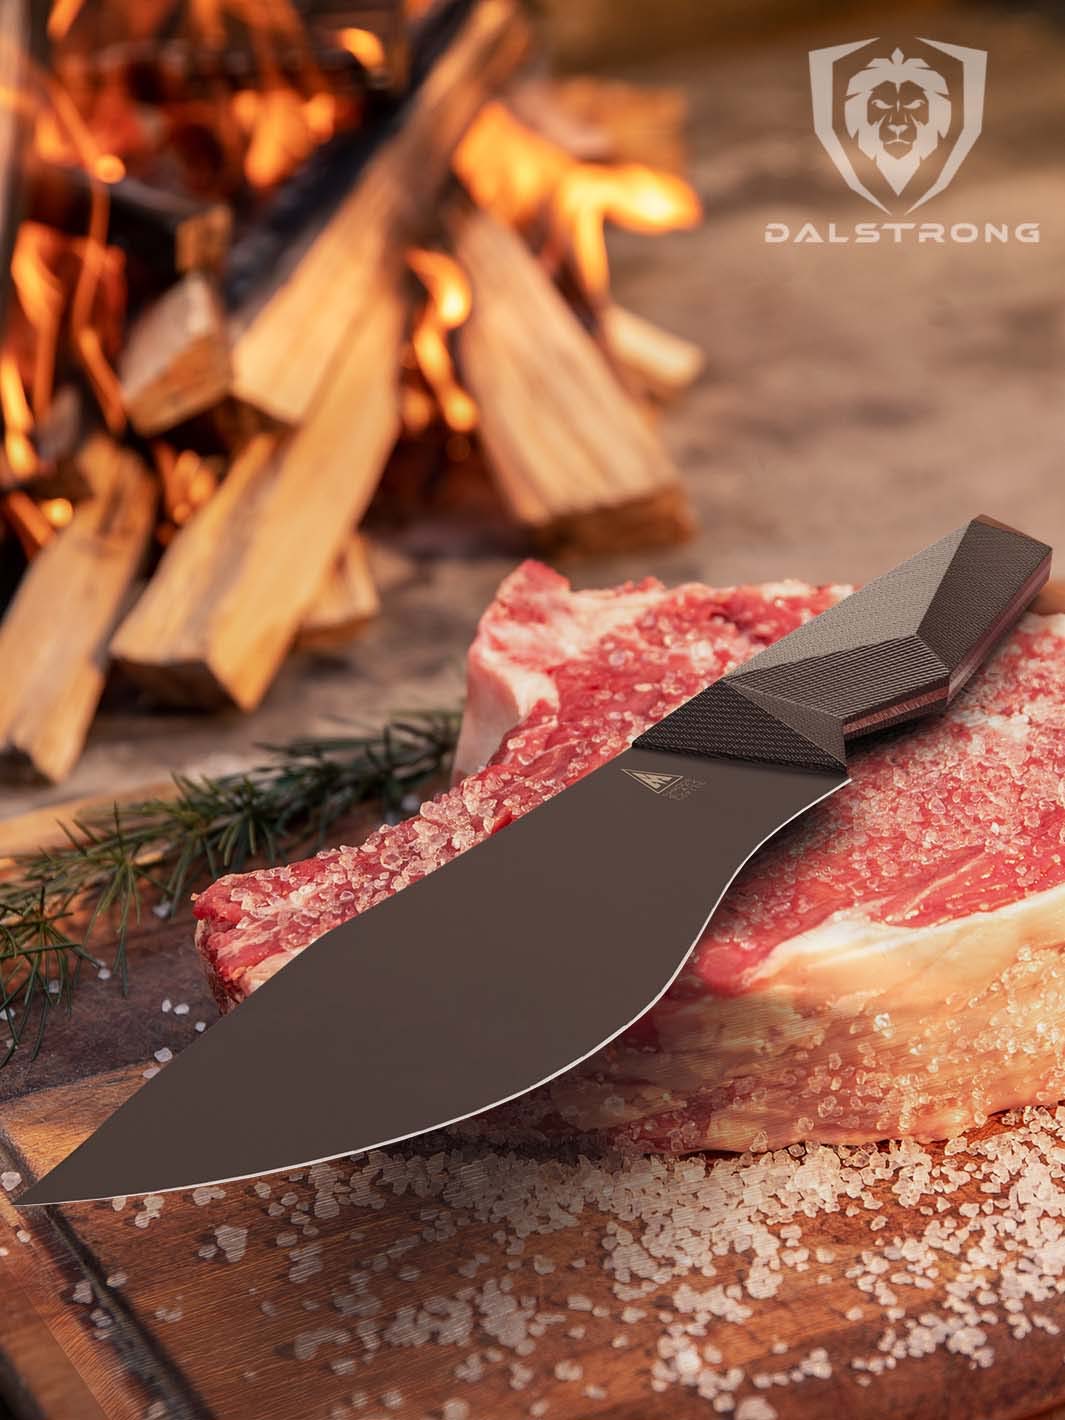 Dalstrong shadow black series 7 inch barong knife on top of a thick cut steak.